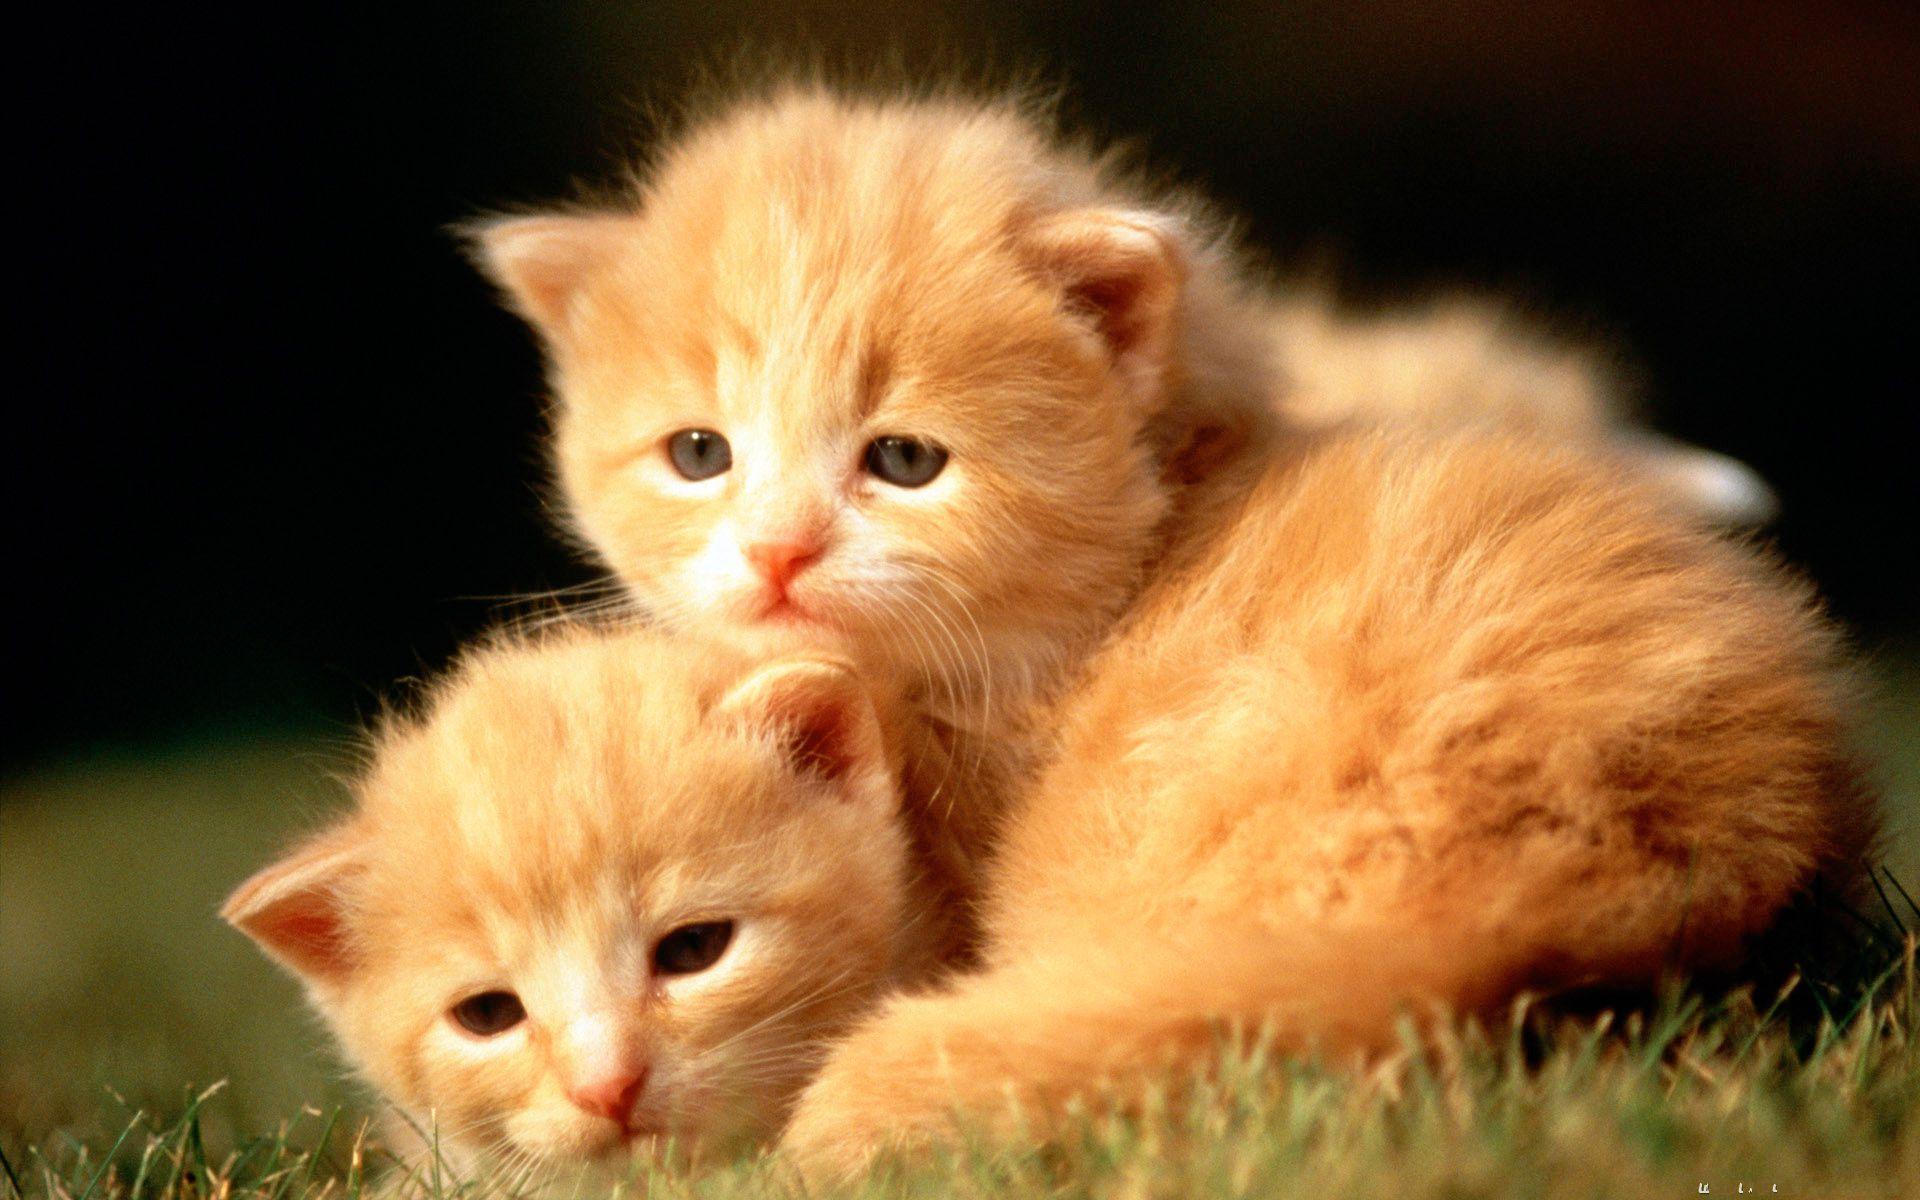 Picture Of Cute Baby Animals Widescreen 2 HD Wallpaper. aduphoto